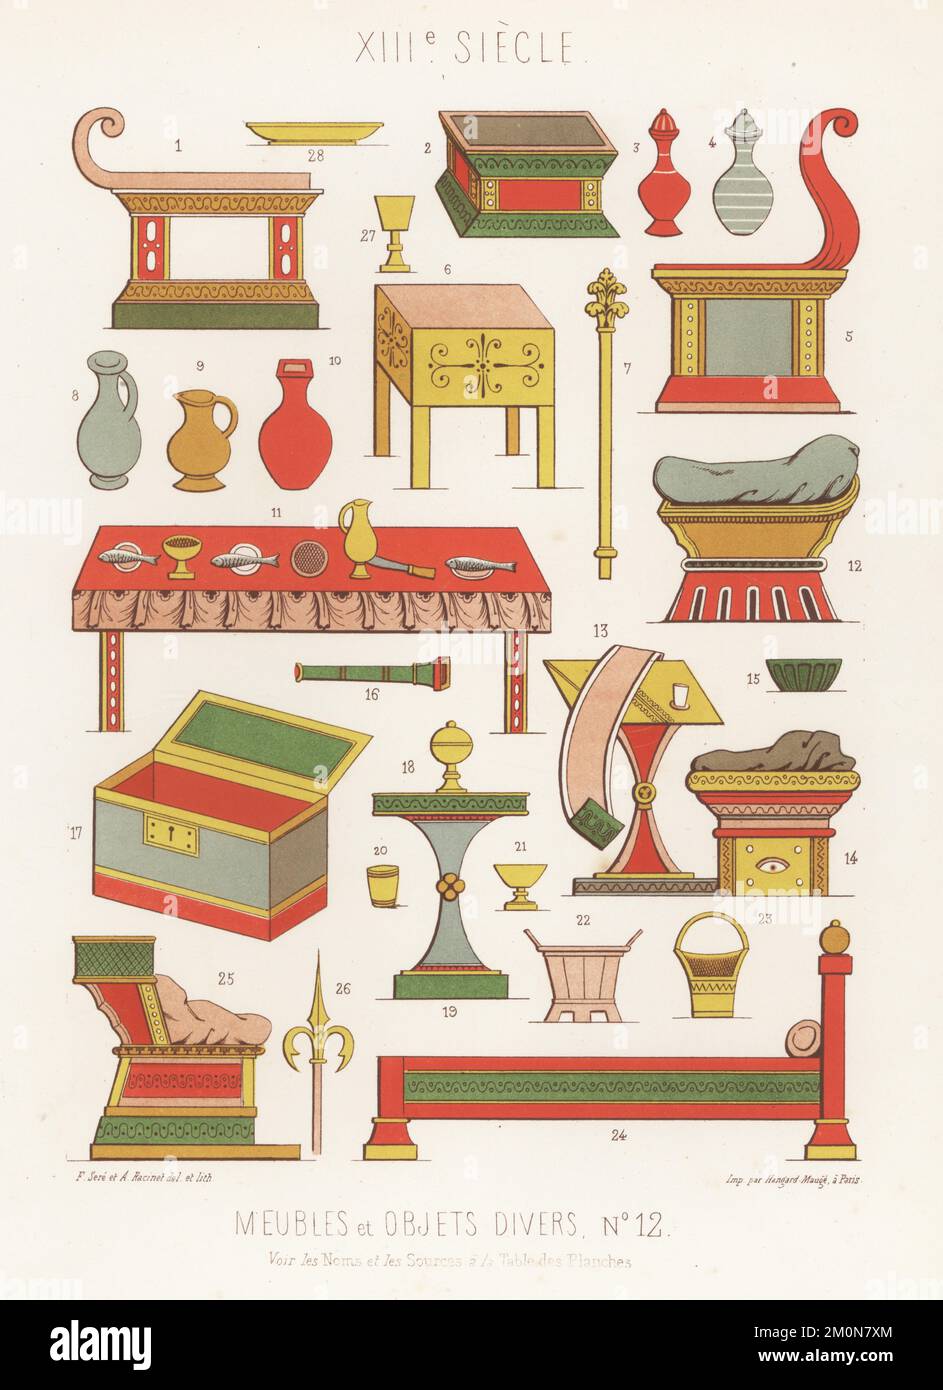 Furniture and diverse objects, 13th century. Tables, vases, beds, chairs, chests 17, megaphone 16, sceptre 7, and halberd or spearhead 26. Taken from stained-glass windows at Bourges Cathedral and manuscripts in the Bib. Imp. Chromolithograph by Ferdinand Sere and Auguste Racinet from Charles Louandre’s Les Arts Somptuaires, The Sumptuary Arts, Hangard-Mauge, Paris, 1858. Stock Photo